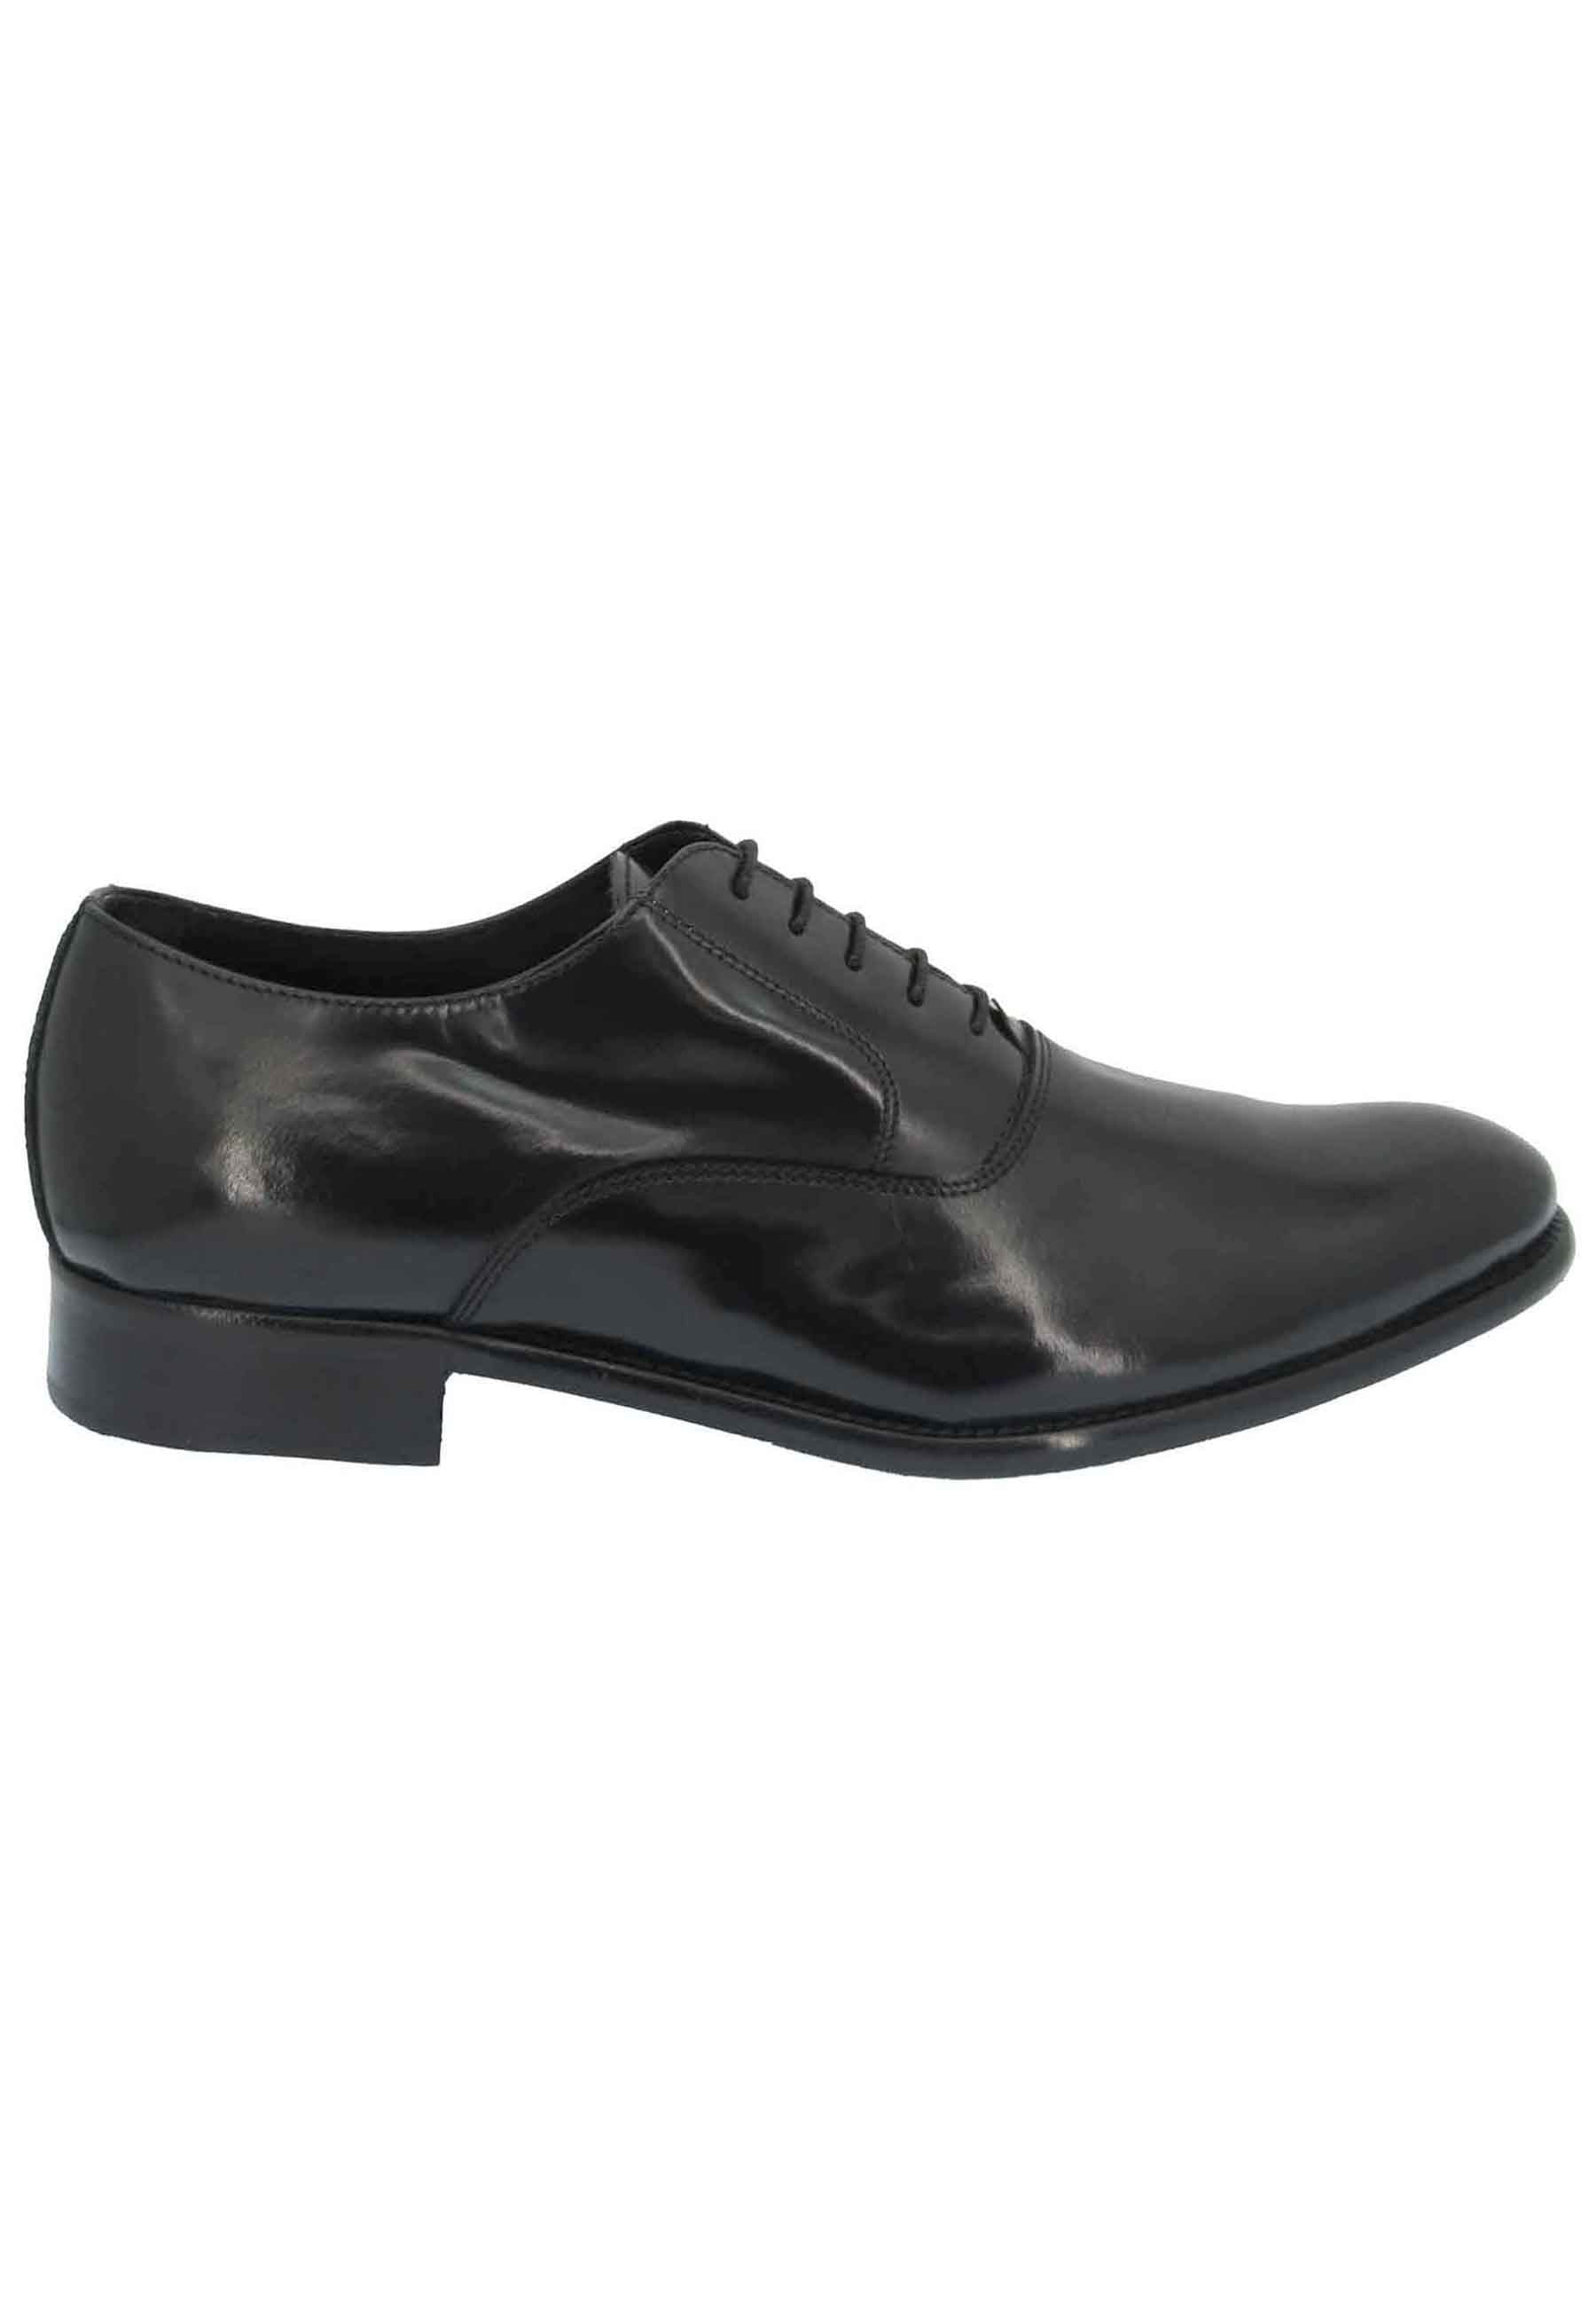 Men's lace-ups in shiny black leather with leather sole